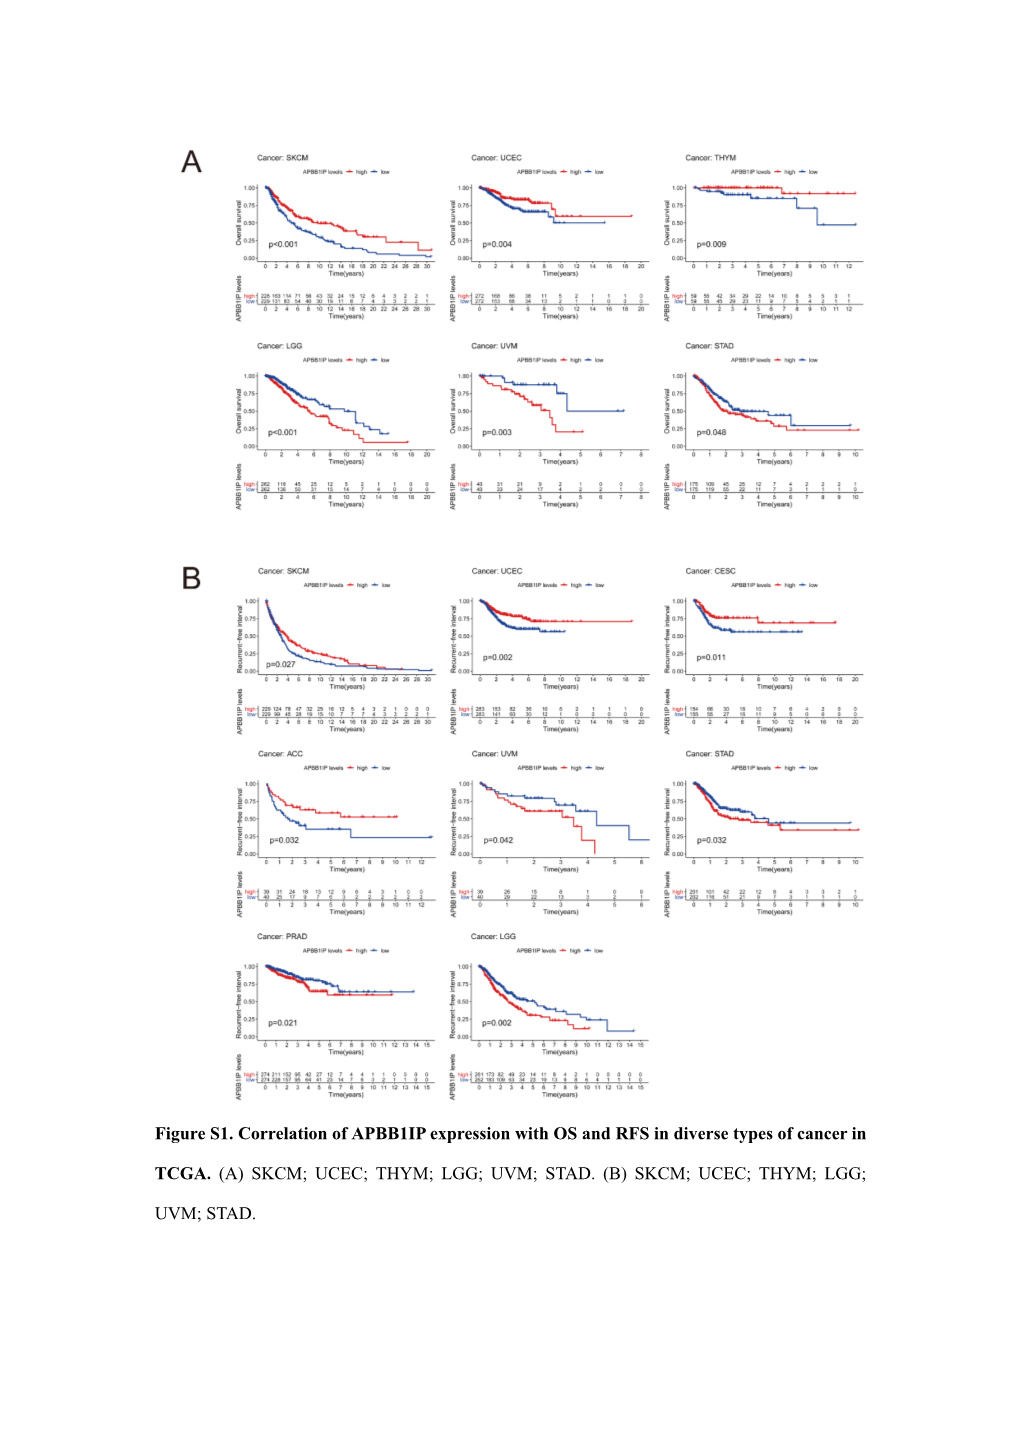 Figure S1. Correlation of APBB1IP Expression with OS and RFS in Diverse Types of Cancer In